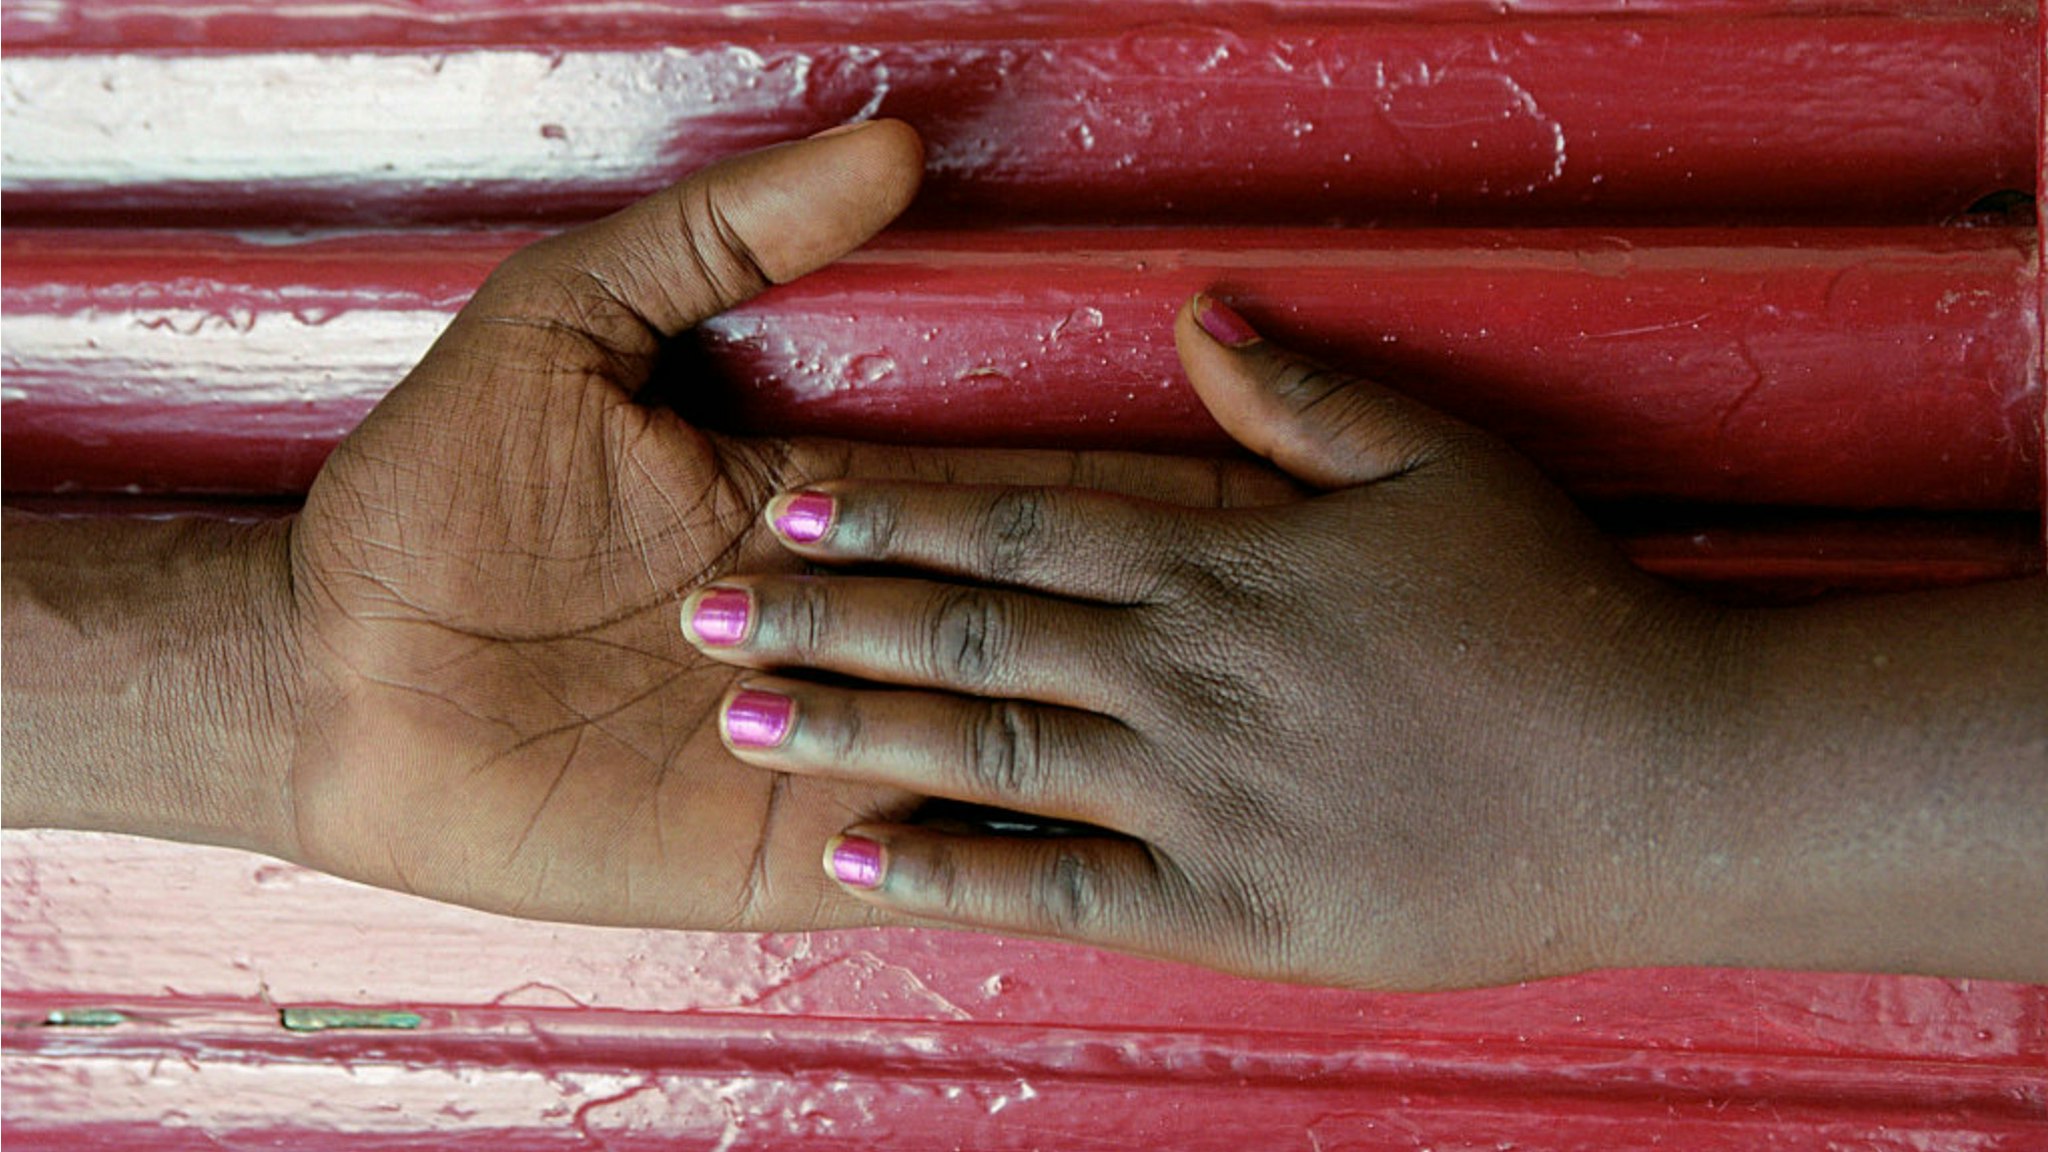 The hands of a couple that met, fell and fell in love at the Oasis project, a community-based program which provides antiretroviral therapy, employment and financial support for people living with HIV and AIDS.